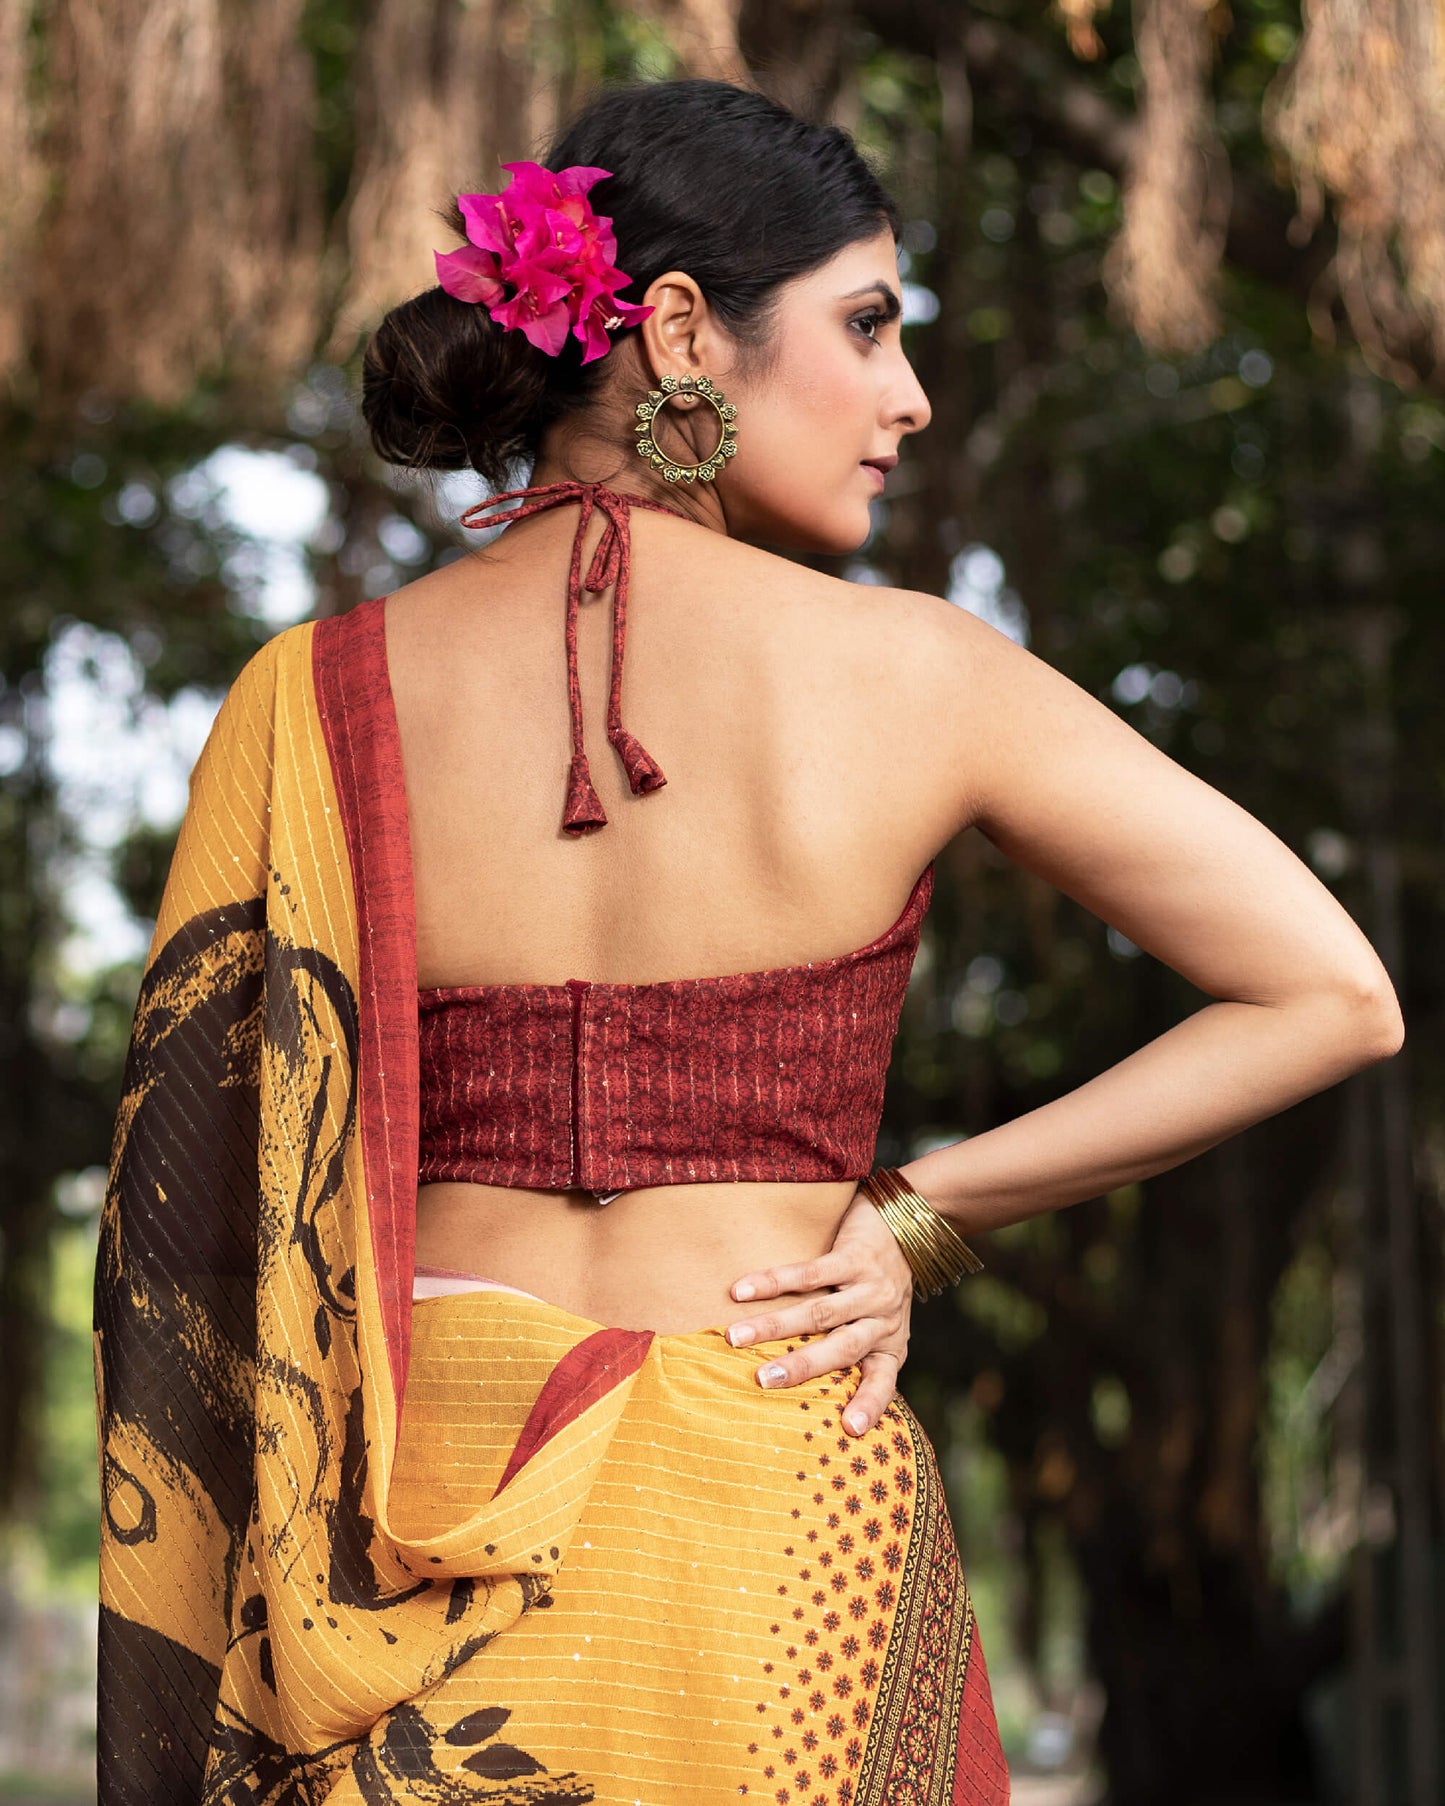 Merigold Yellow And Black Quirky Pattern Premium Sequins Georgette Saree With Tassels